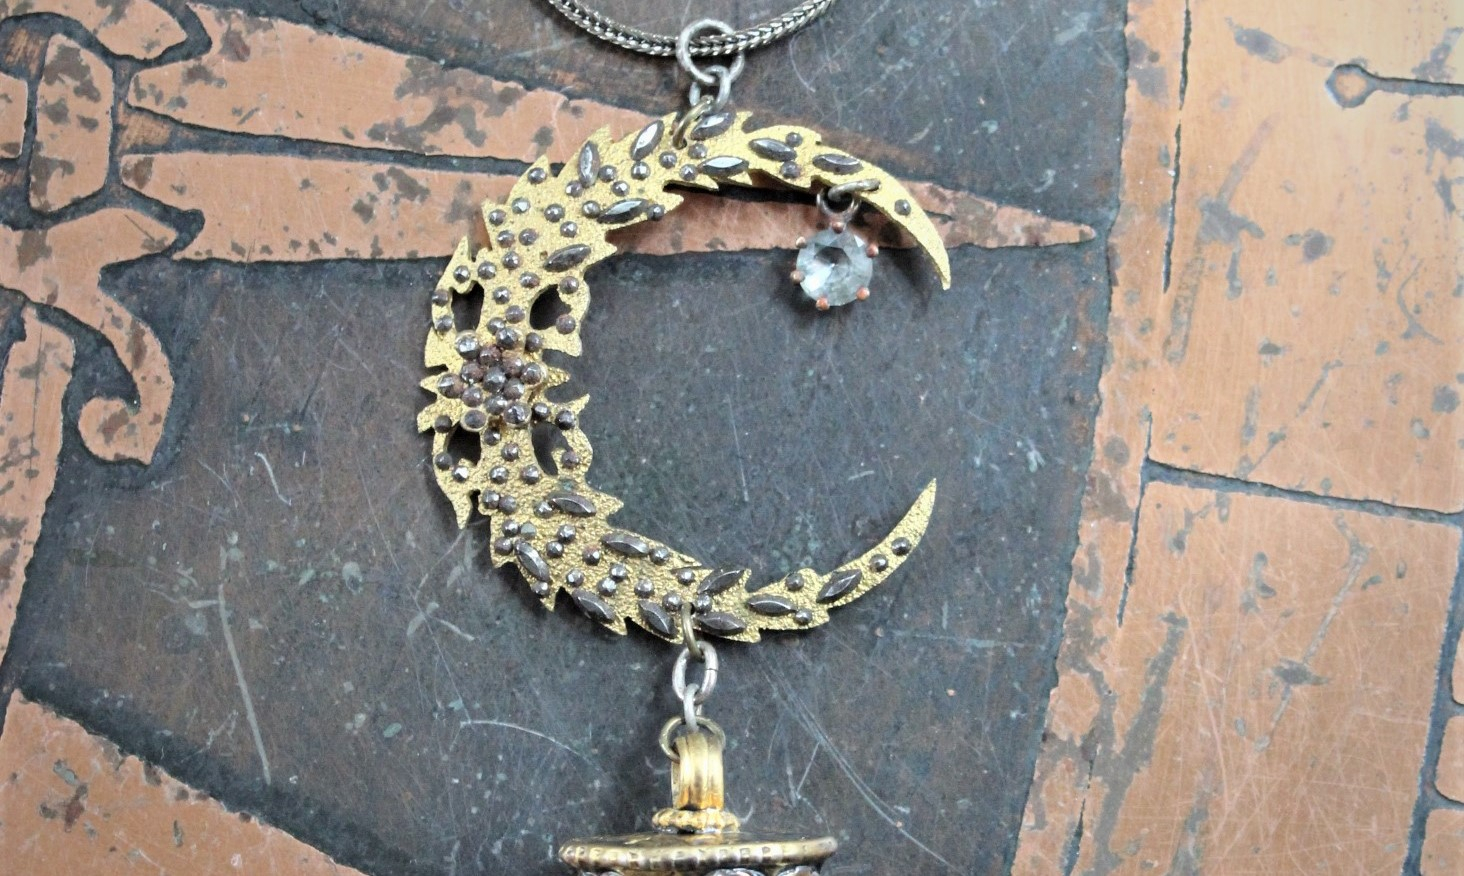 Like the Universe Necklace with Antique Cut Steel Crescent Moon Finding, Water Clear Capped Quartz Point, Antique Foxtail Chain